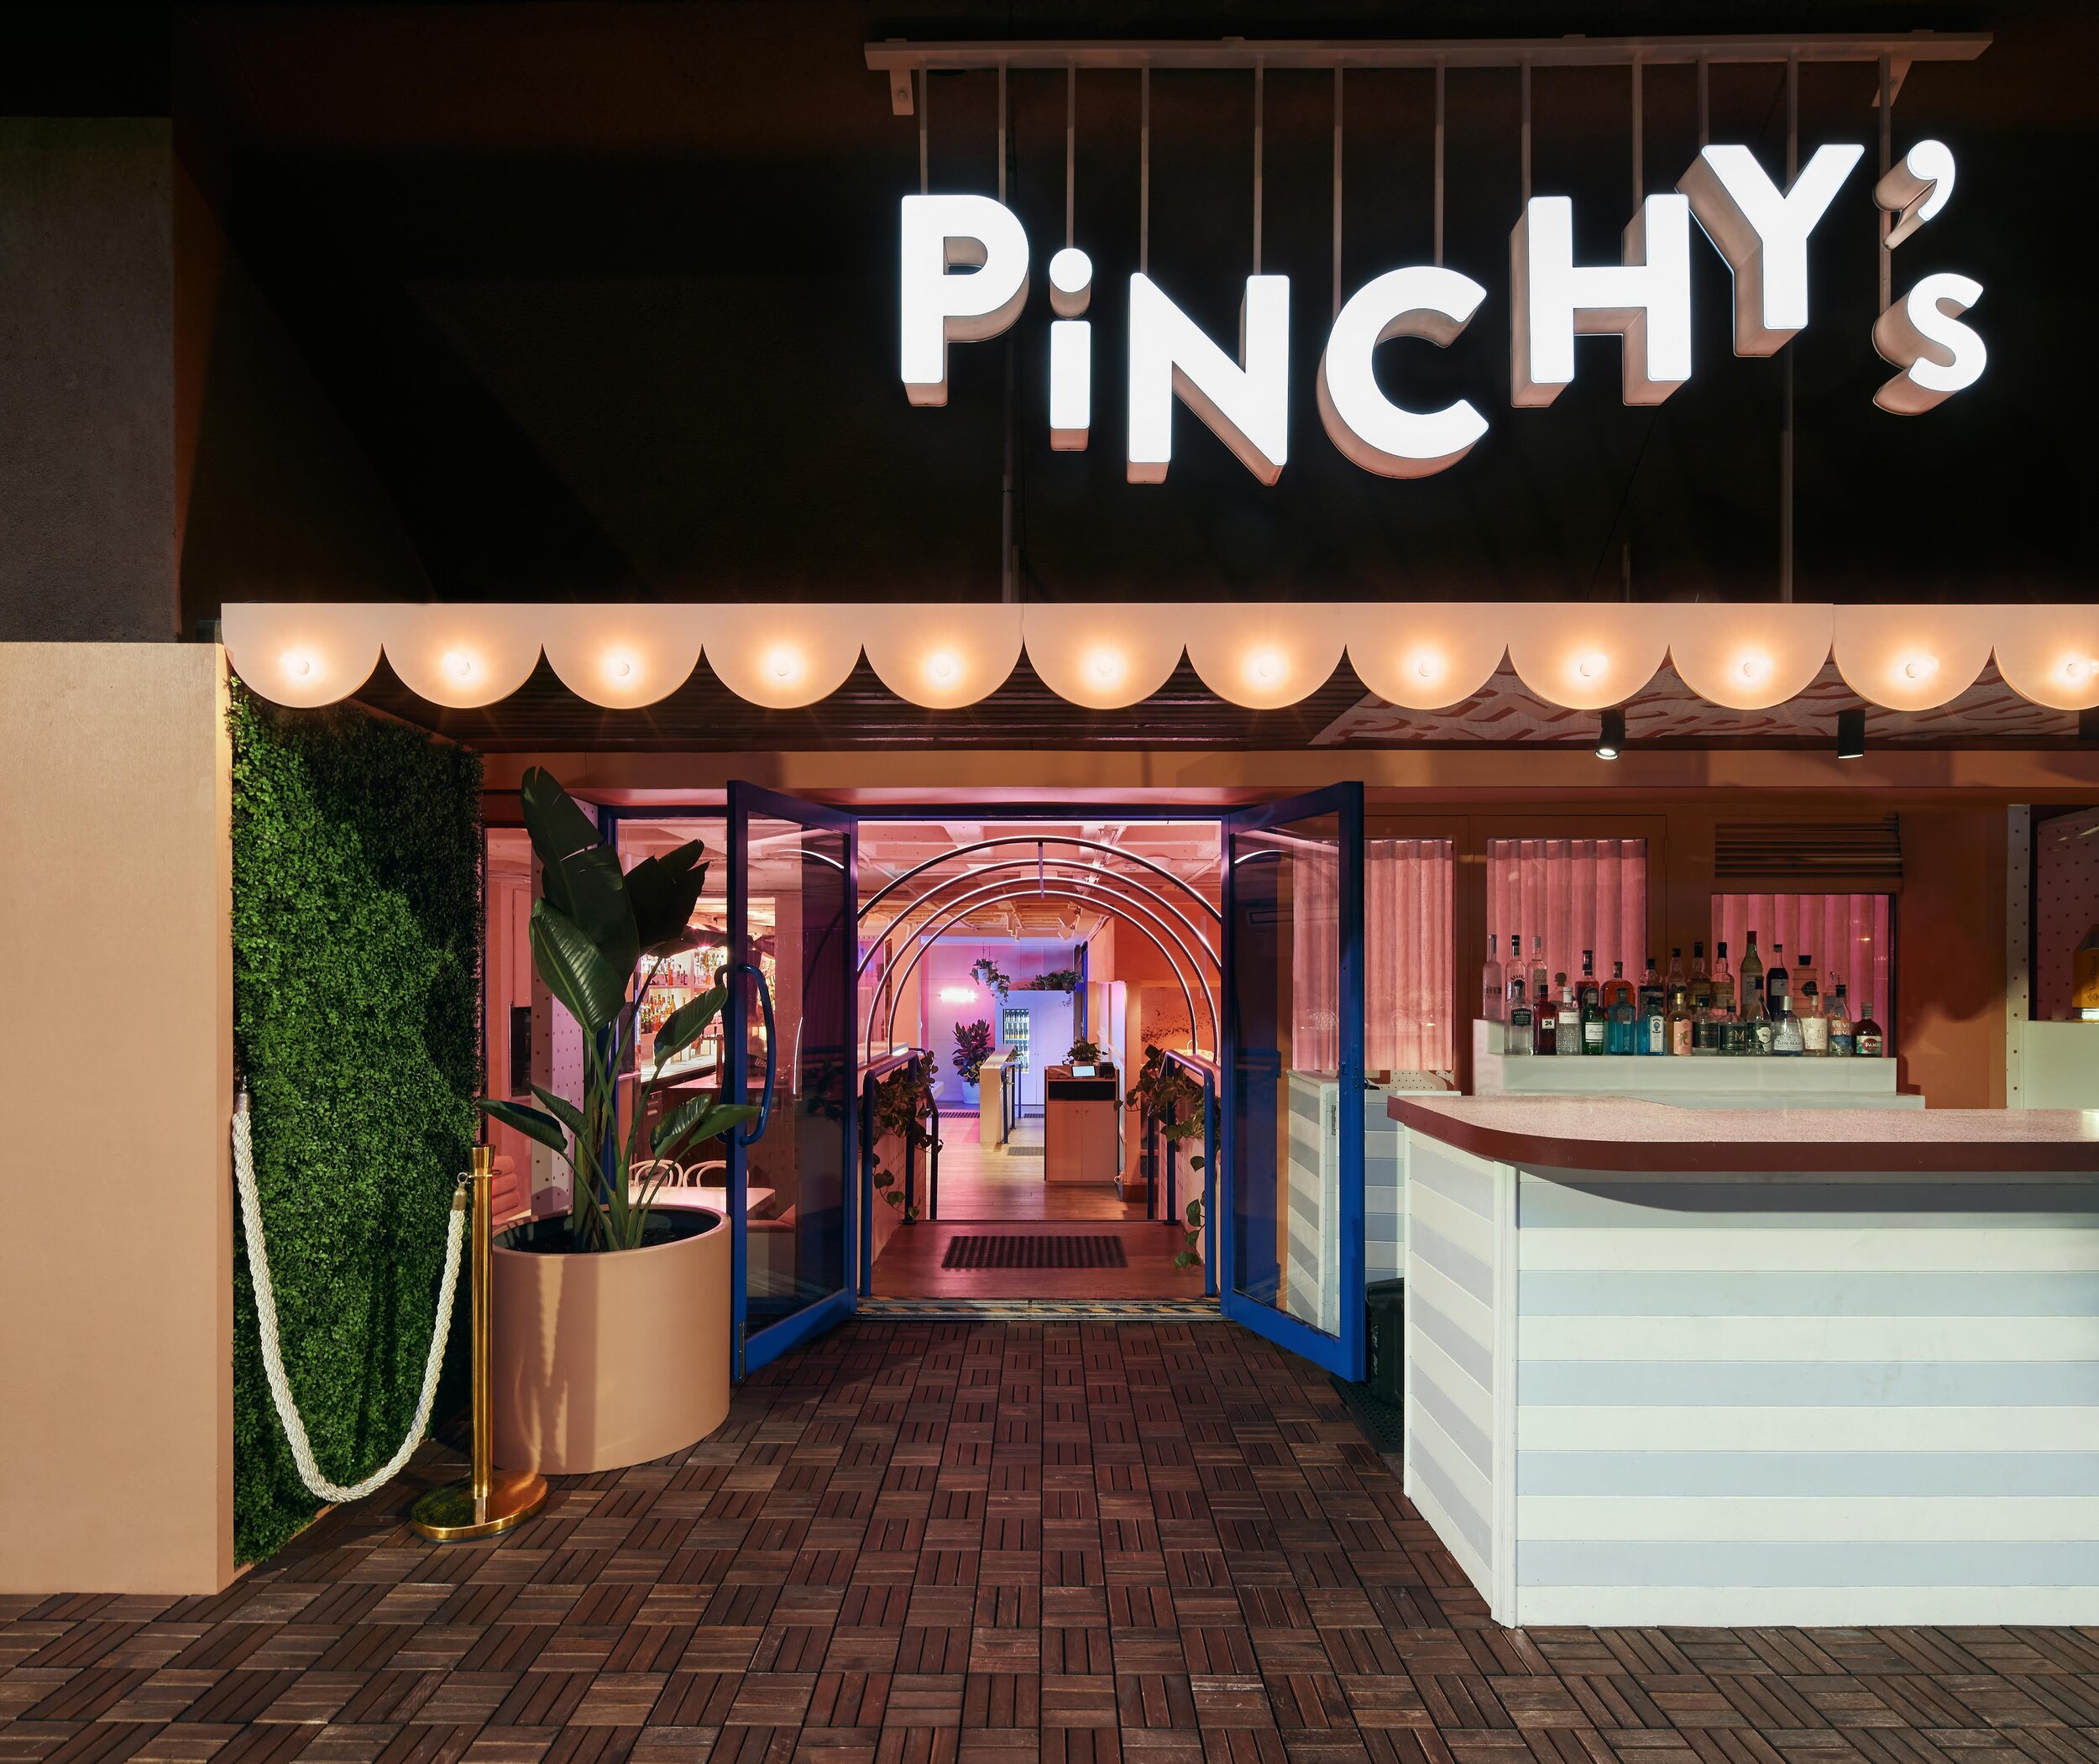 PINCHY'S - MADE BY SEA